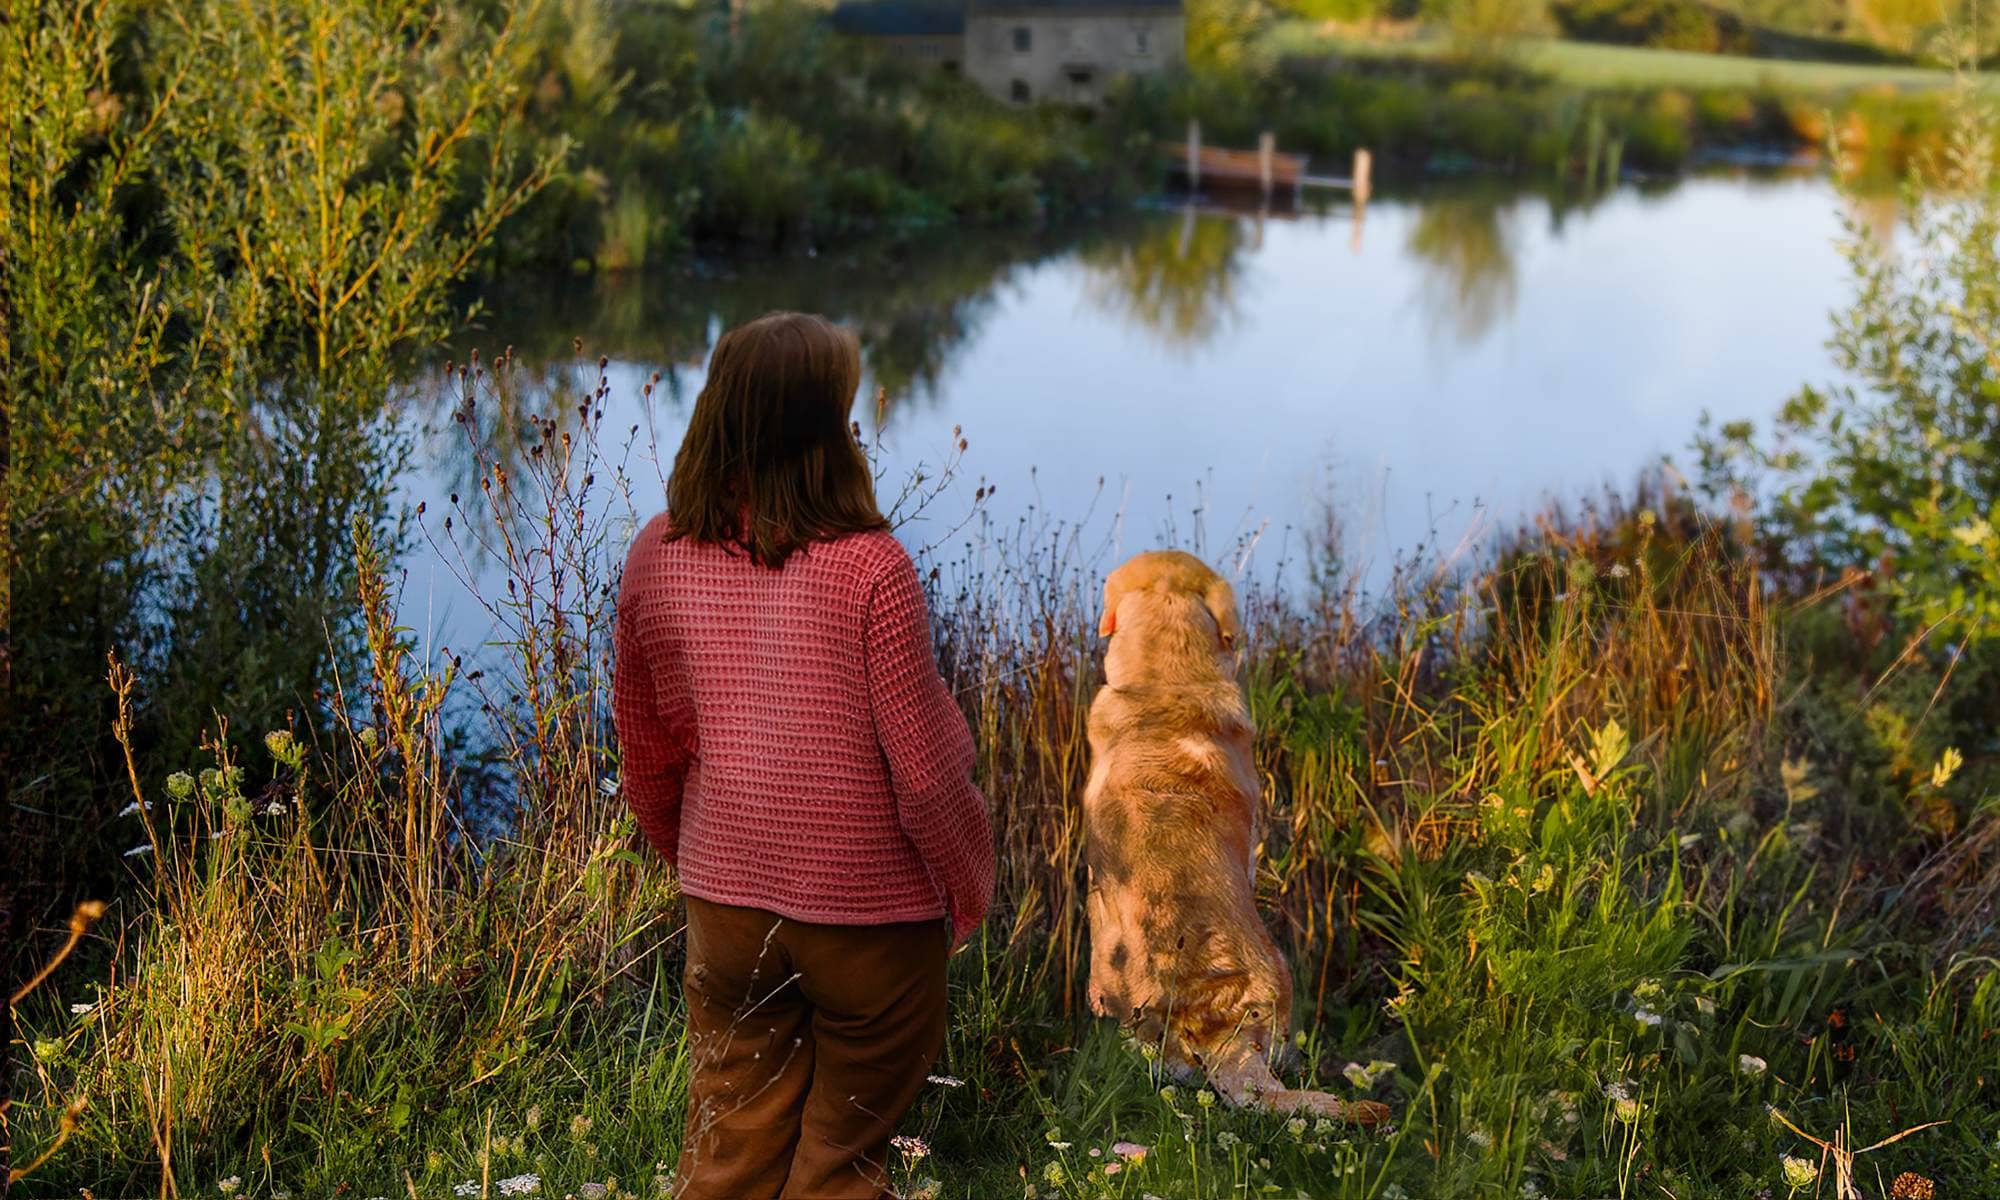 Katie Allen and Kit the dog standing in the spirthill field over looking the pond